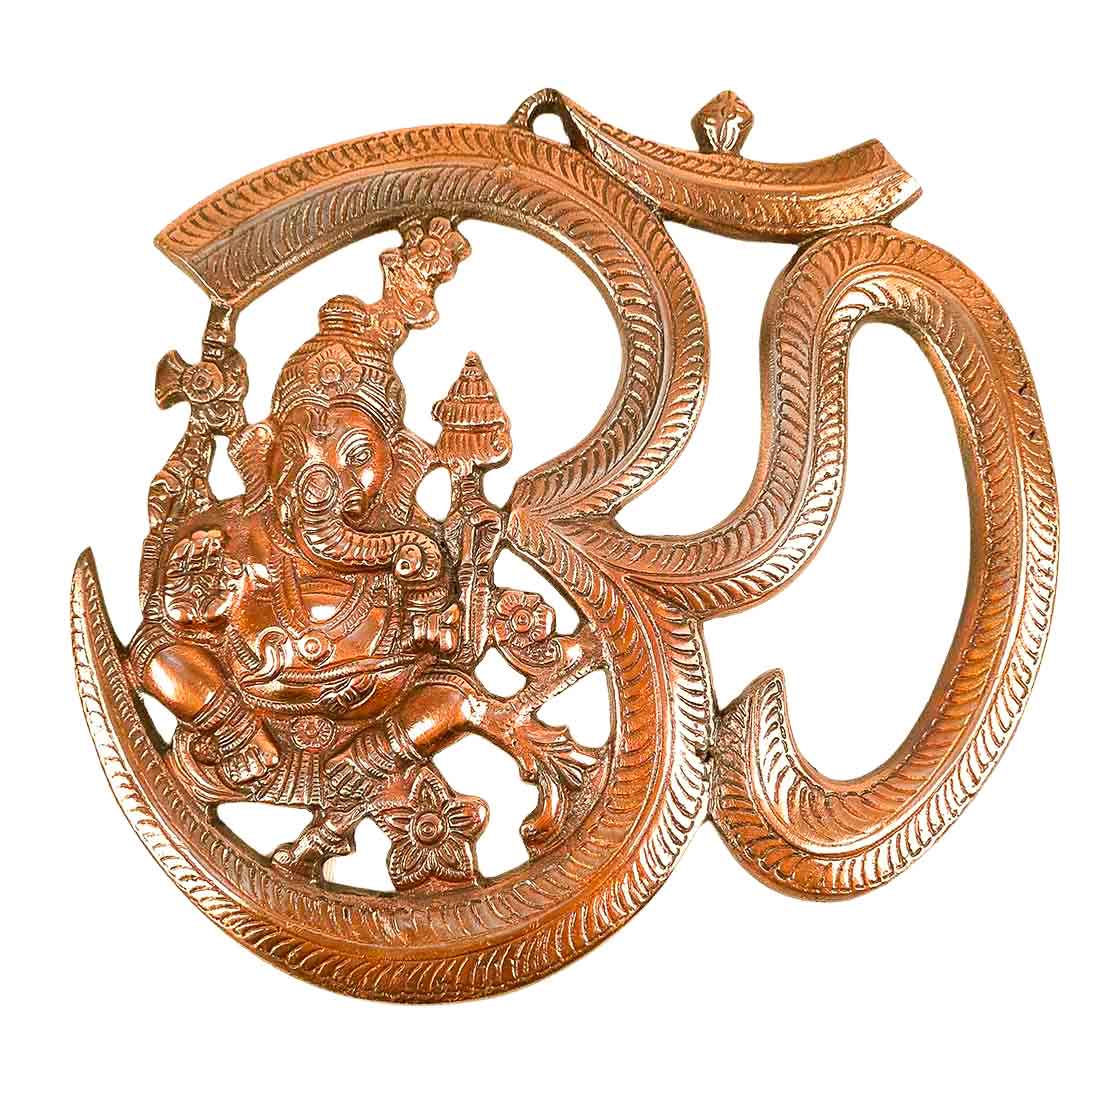 Ganesh Wall Hanging Murti | Ganesha With Om Wall Idol Decor - for Entrance Door | Ganesha Statue Hangings - for Home, Puja, Temple, Religious Decor & Gift - 10 Inch